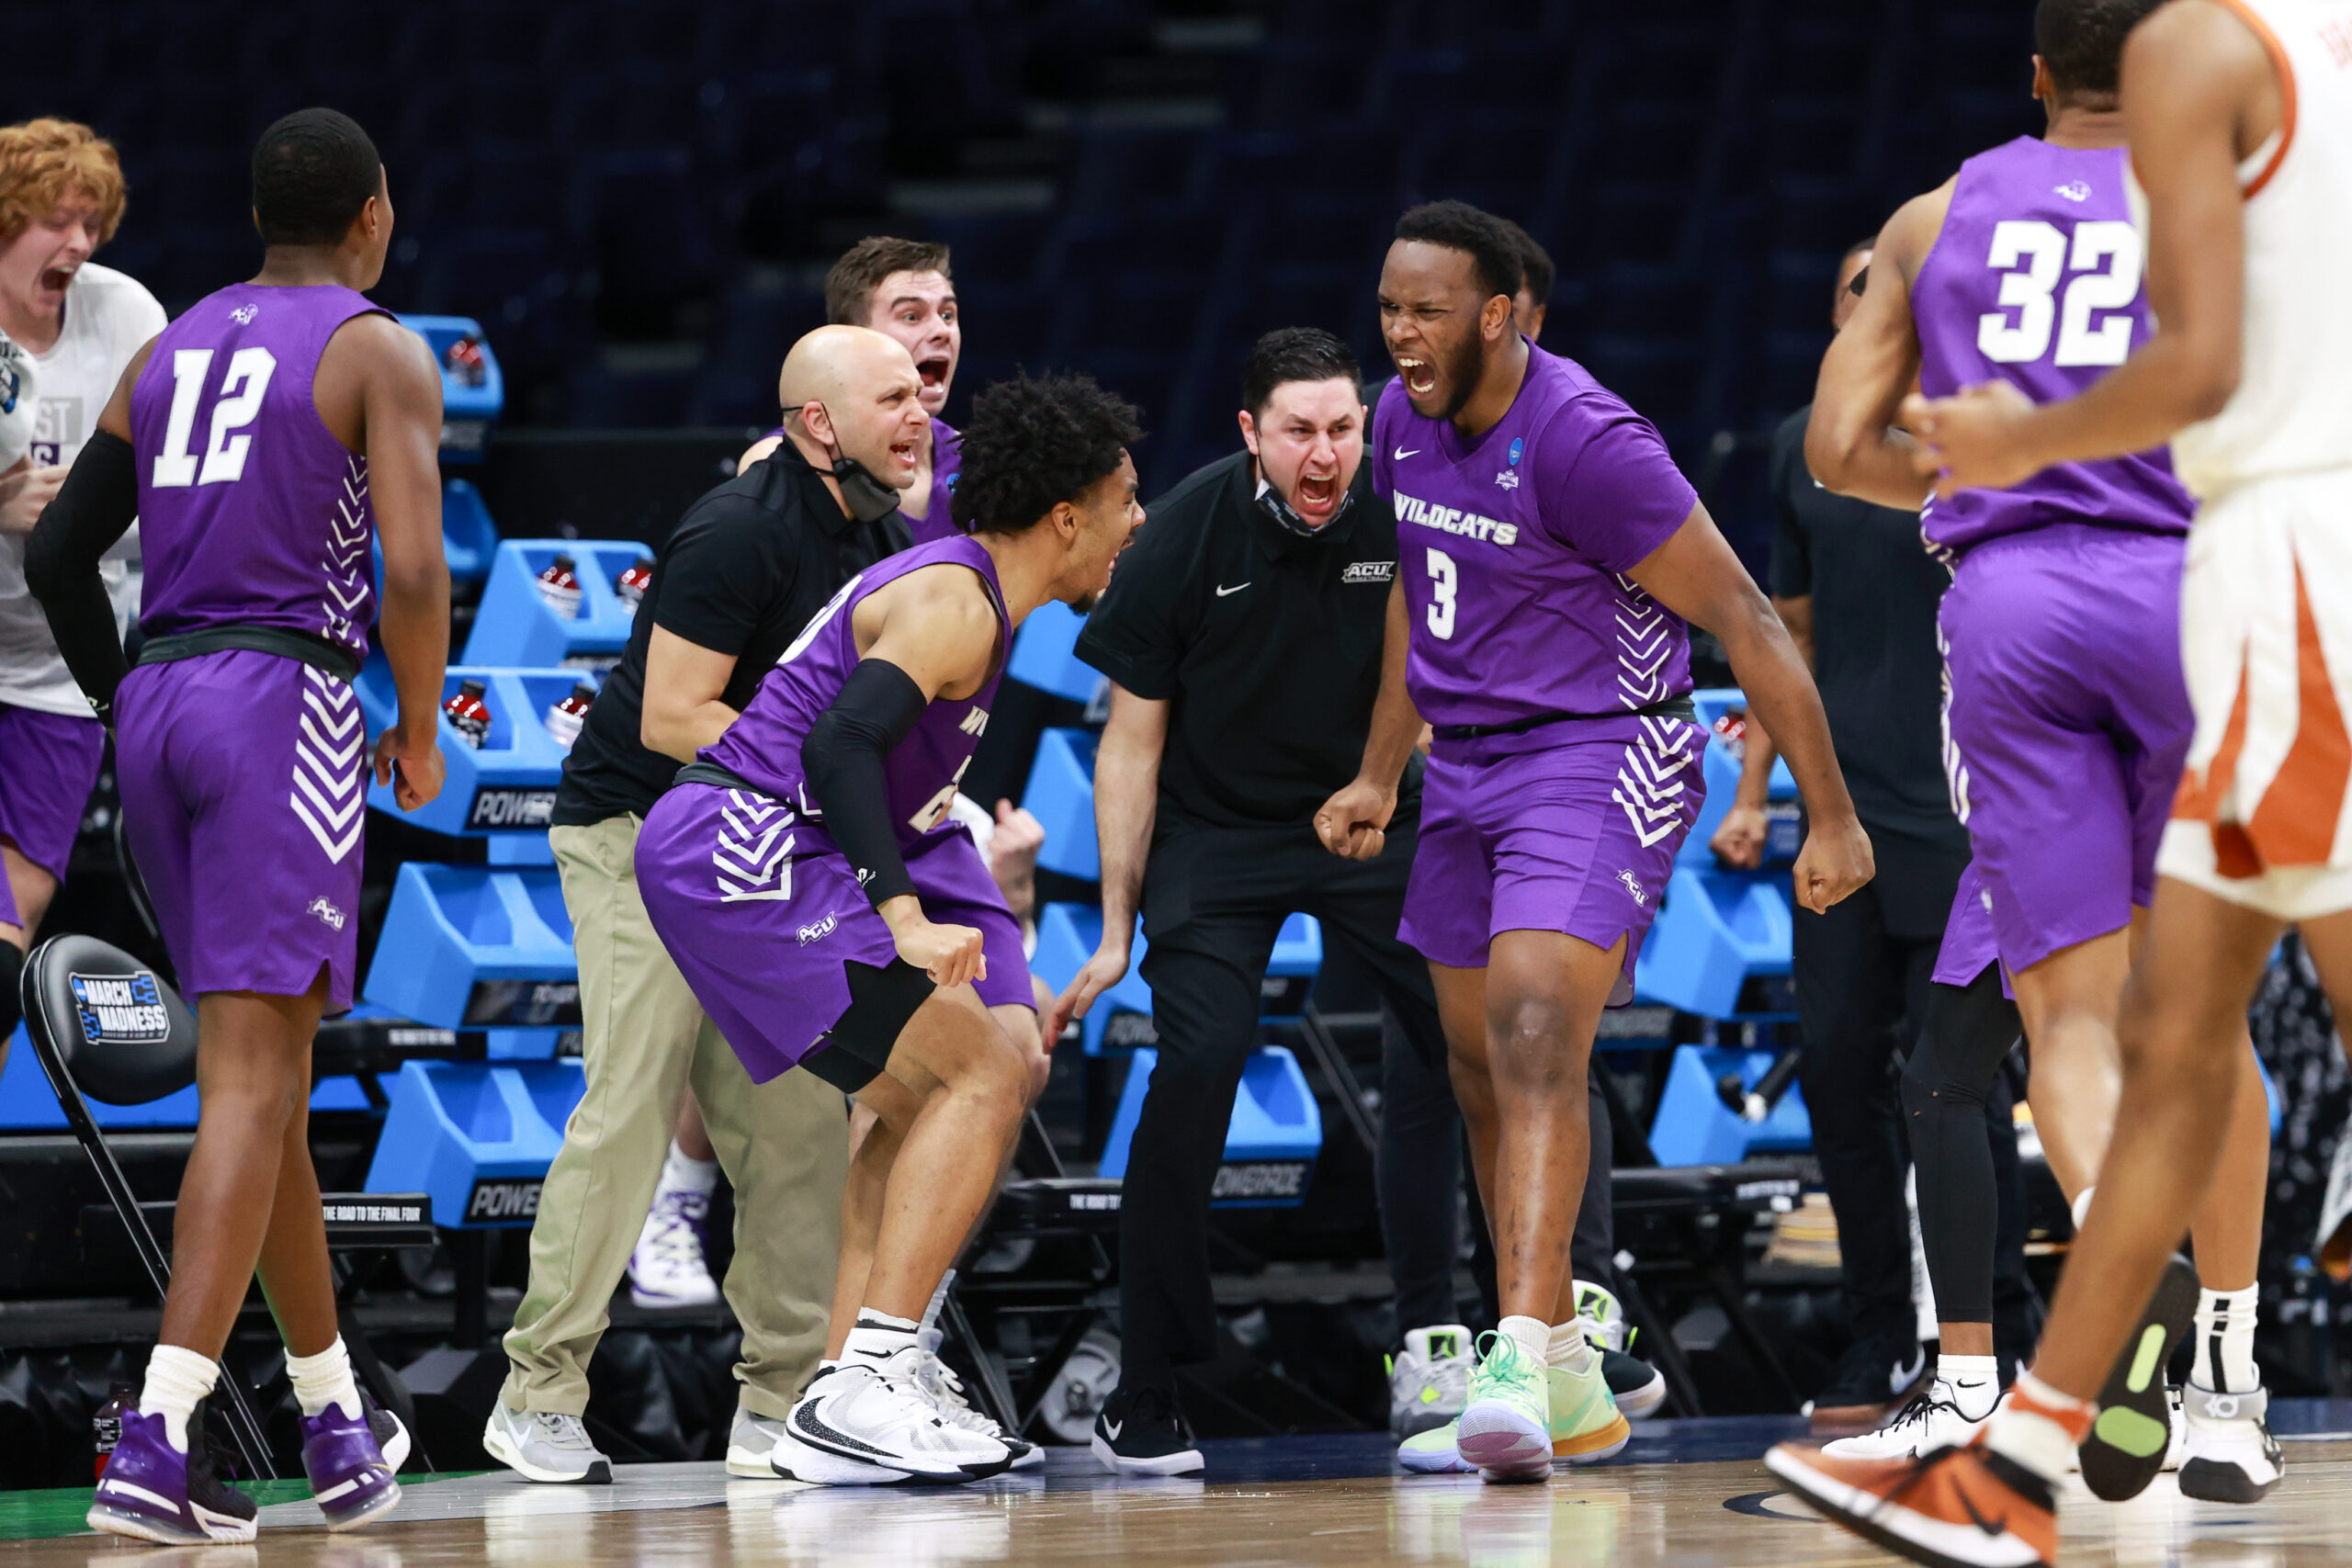 Joe Pleasant, whose two late free throws and stolen pass sealed ACU’s upset win over Texas, leaps with joy while leading teammates off Unity Court at Lucas Oil Stadium in Indianapolis during the NCAA Tournament.